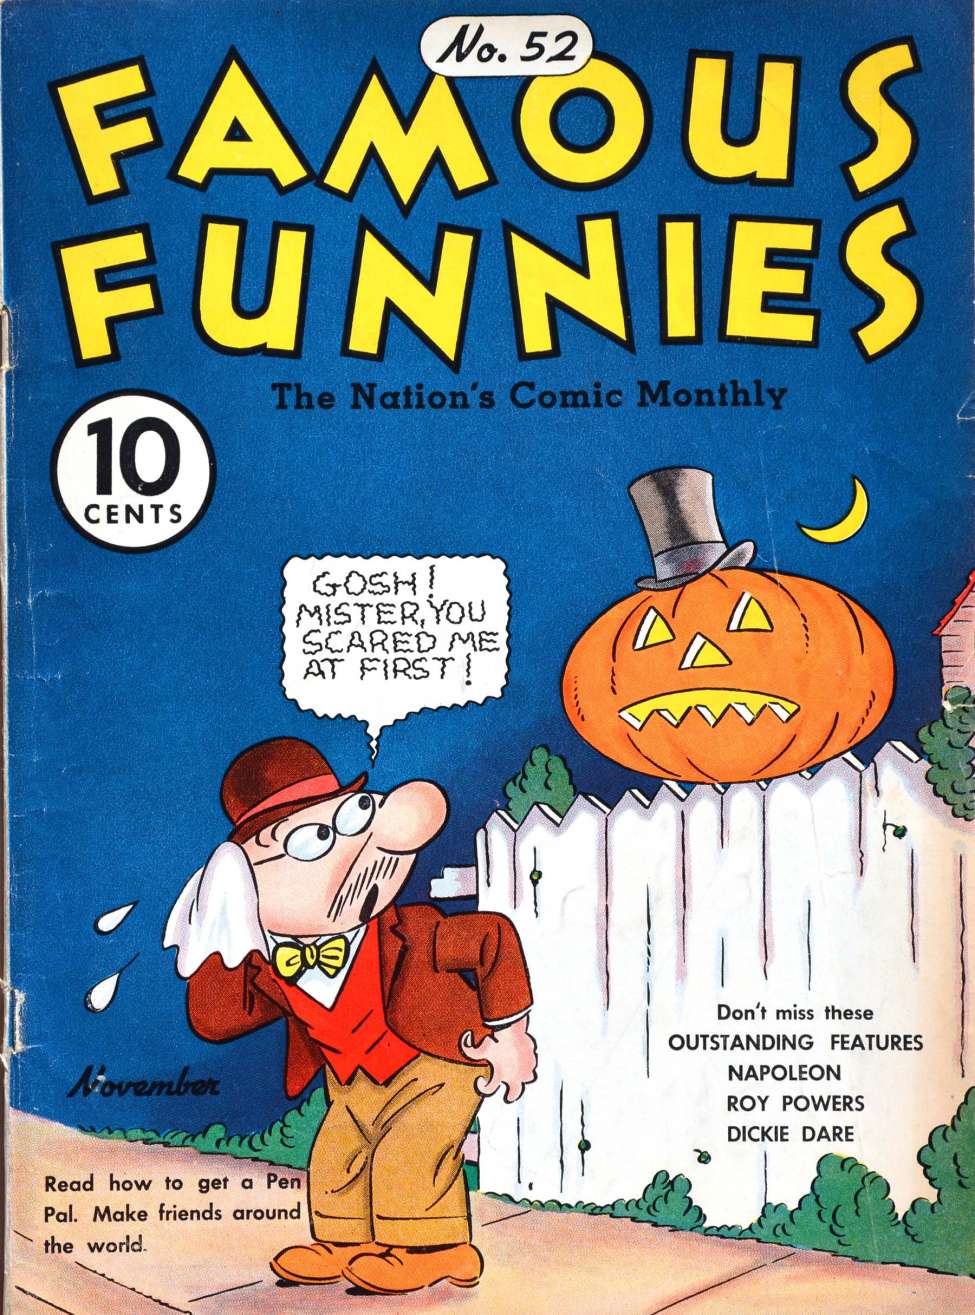 Book Cover For Famous Funnies 52 - Version 1